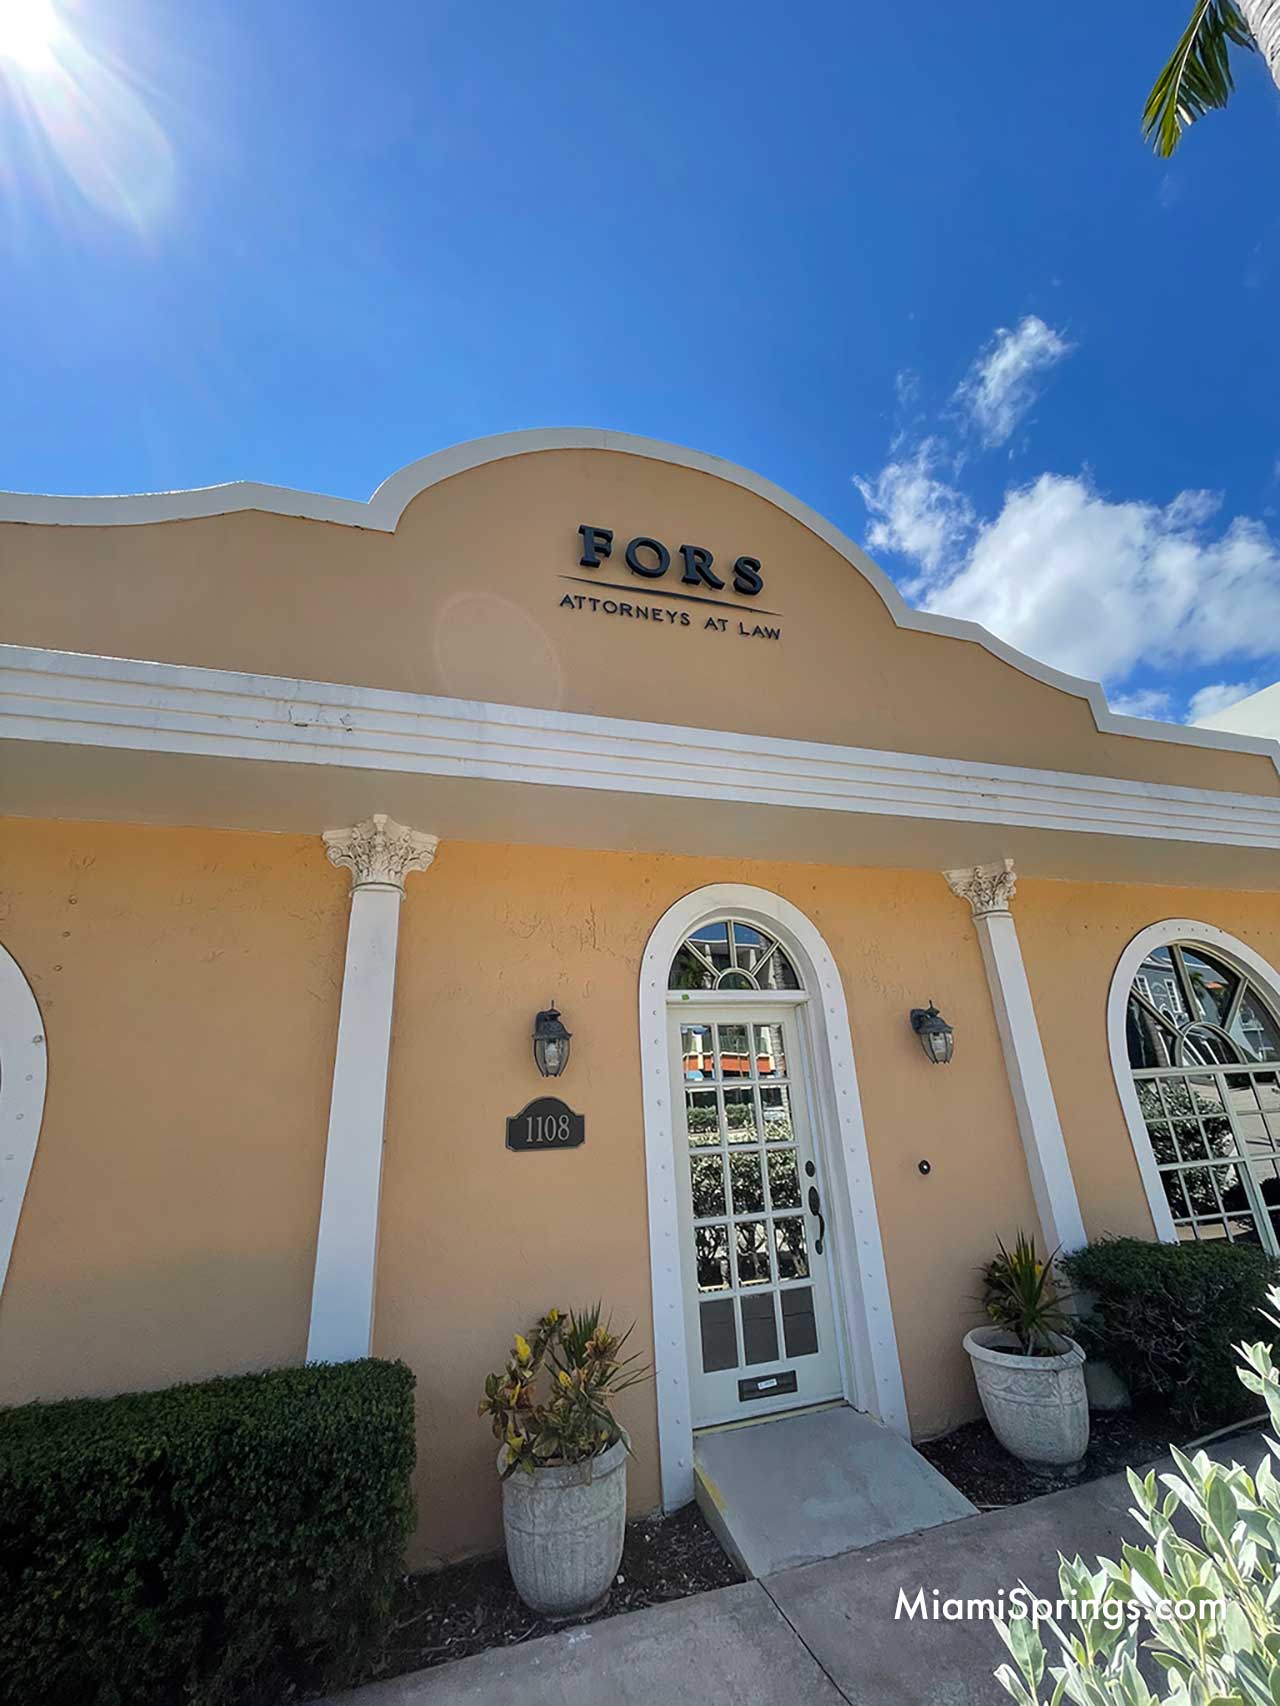 Fors Law Firm in Coral Gables